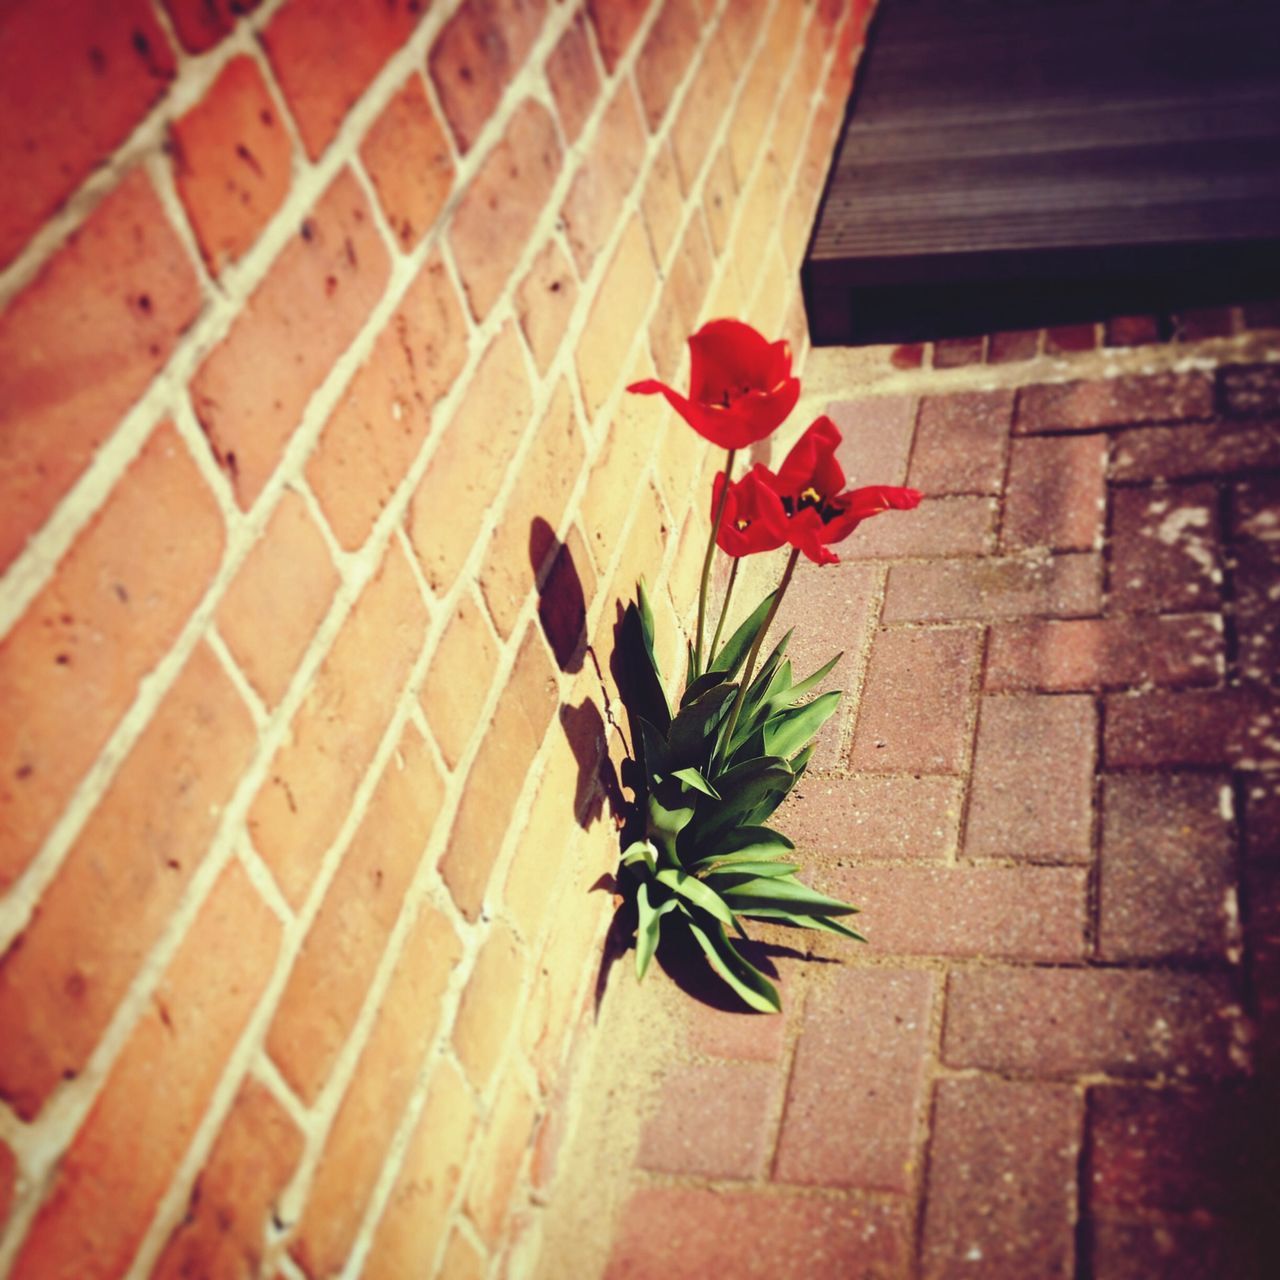 flower, red, growth, plant, leaf, potted plant, freshness, wall - building feature, fragility, petal, built structure, brick wall, nature, architecture, close-up, building exterior, day, flower head, wall, sunlight